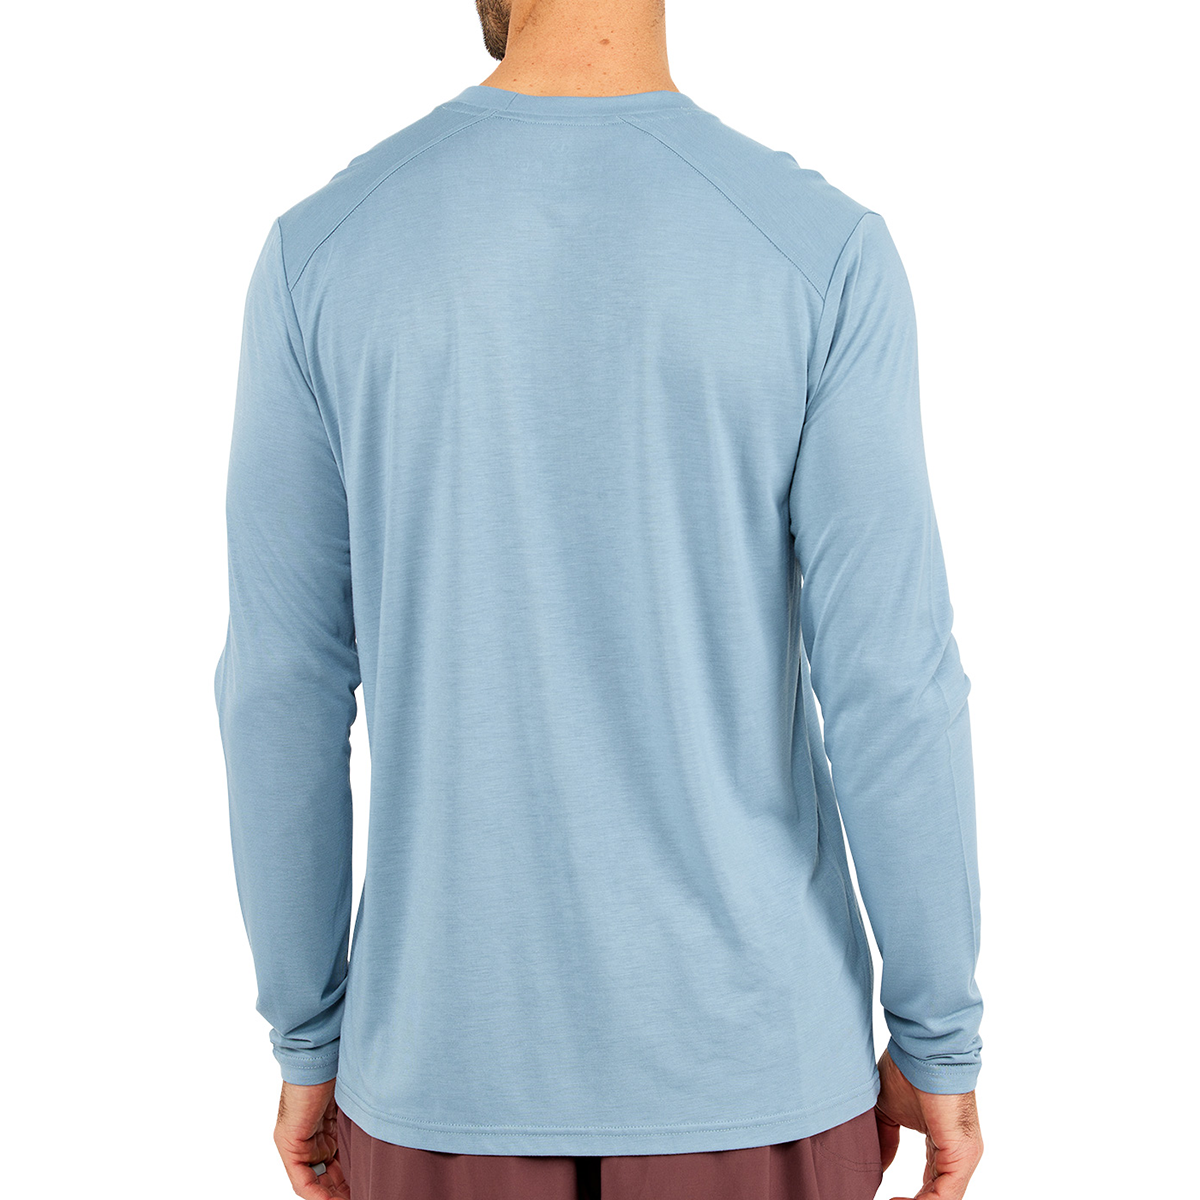 Free Fly Bamboo Lightweight Longsleeve, , large image number null